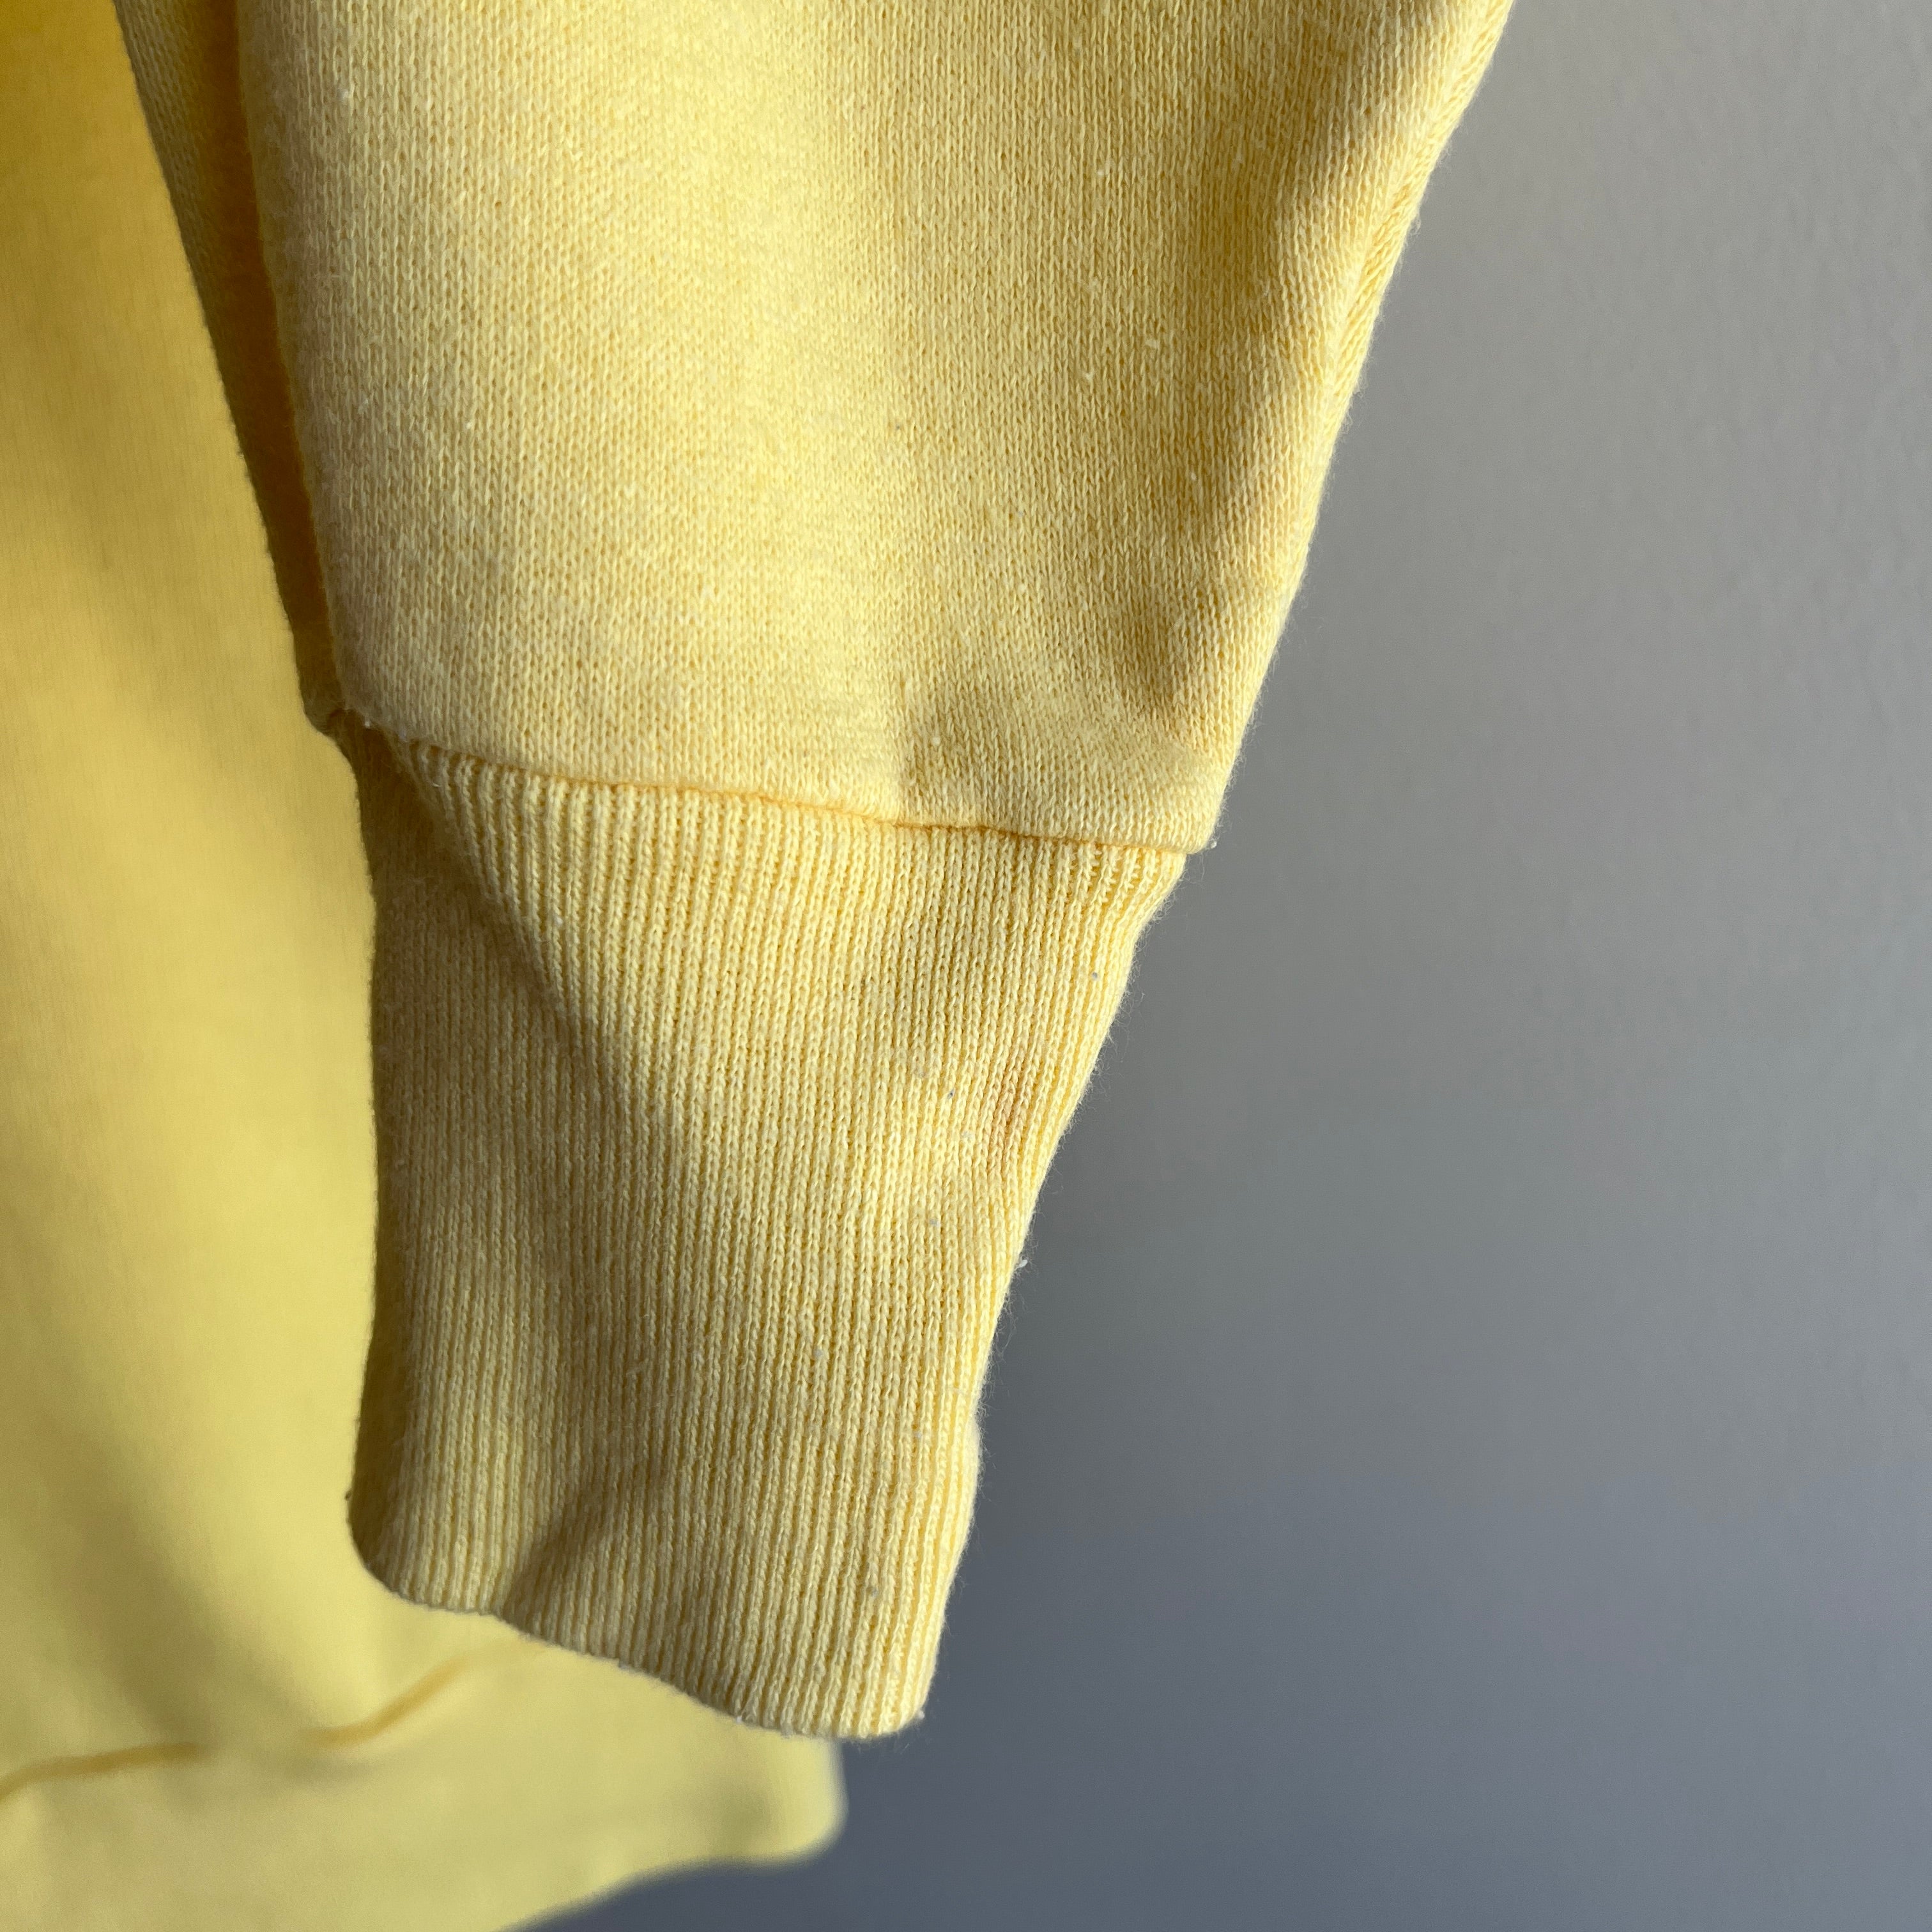 1980s Soft and Cozy Pale Sunshine Sweatshirt by Pannill